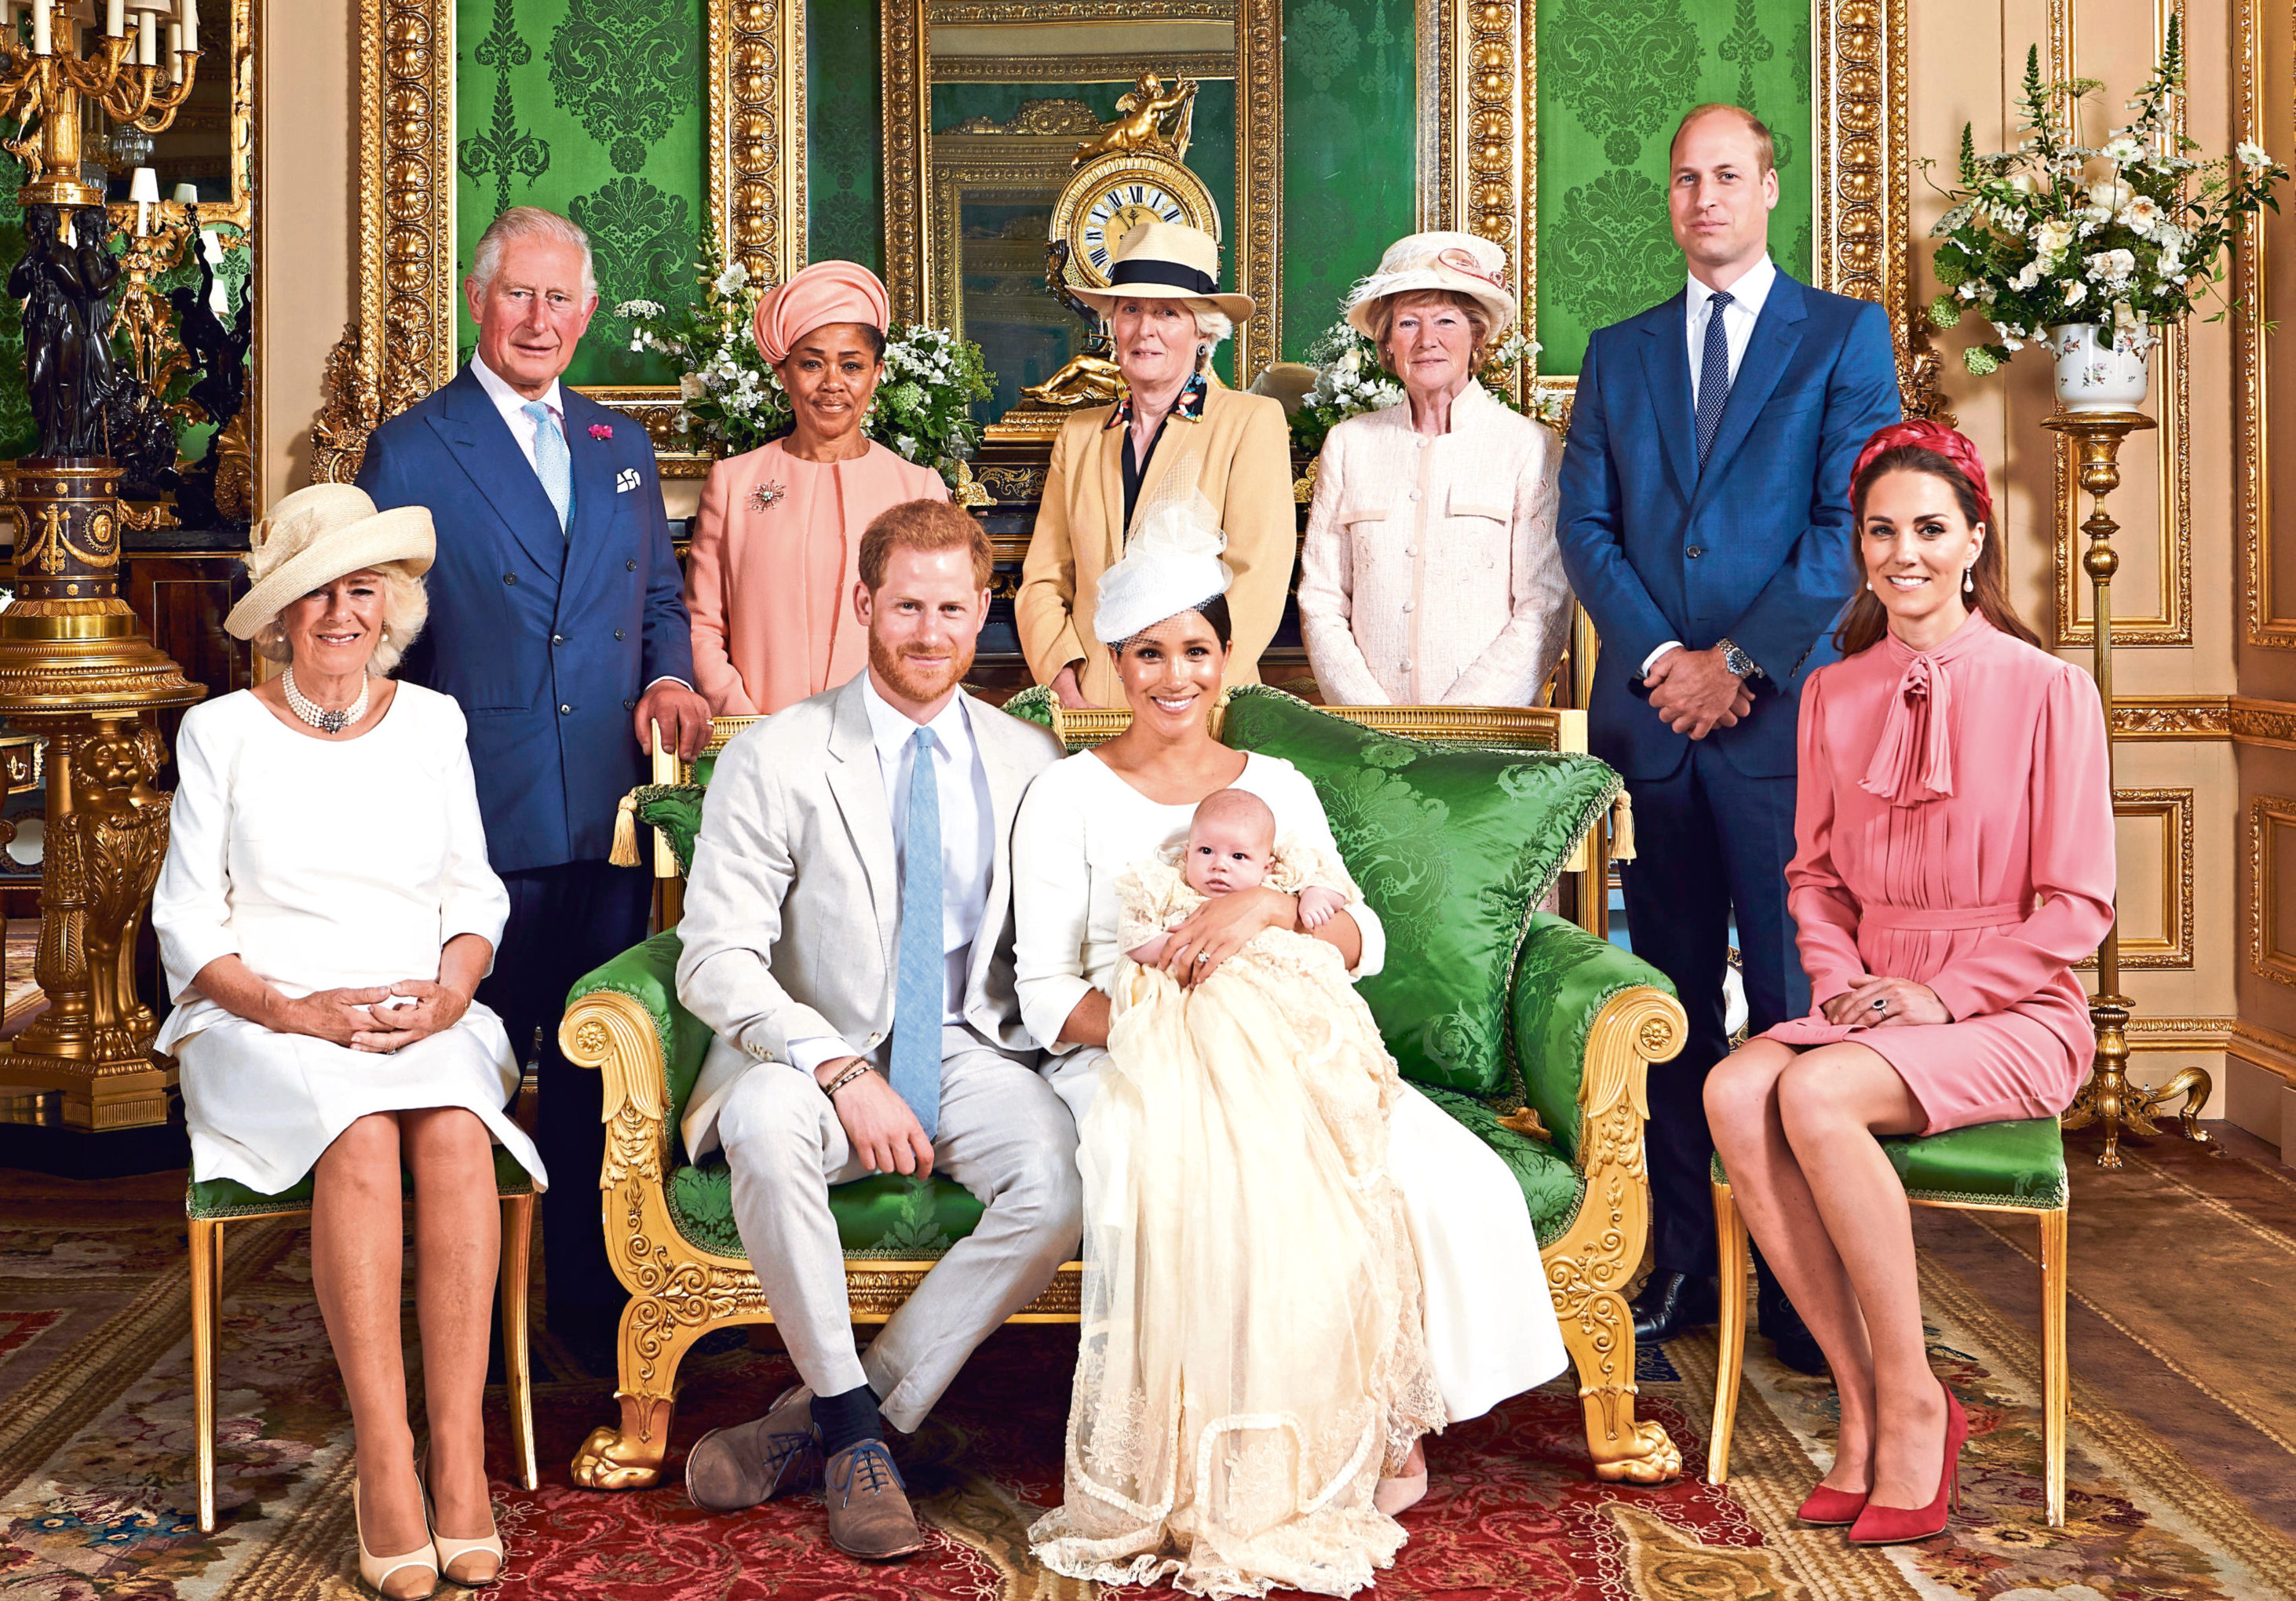 The official photo... The Duke and Duchess with their son, Archie and (left to right) the Duchess of Cornwall, the Prince of Wales, Doria Ragland, Lady Jane Fellowes, Lady Sarah McCorquodale, and the Duke and The Duchess of Cambridge